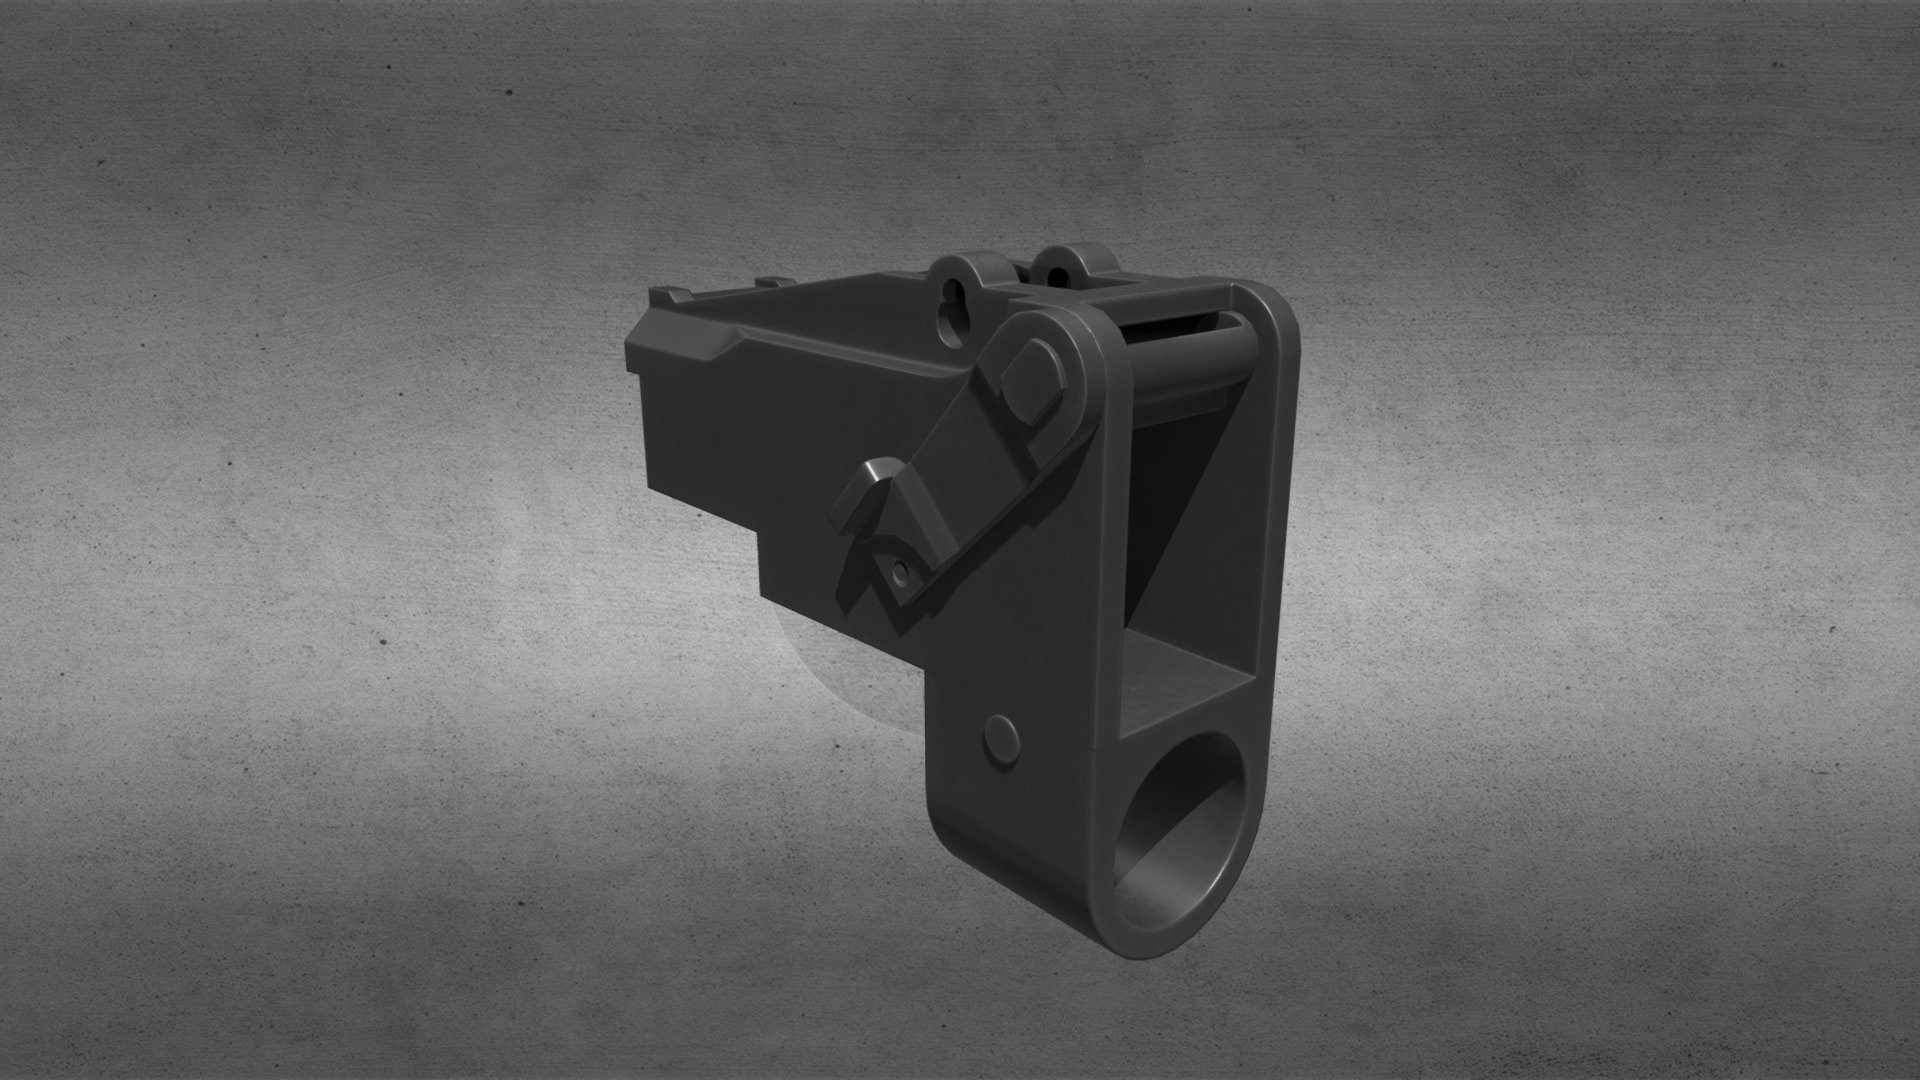 This Asset is part of

[MWS] Modular Weapon System - Asset Project

targeted to create semi-detailed game ready Weapon Models based on popular Weapon Platforms with a variety of changeable Parts for enhanced Gunsmith Features in Games.



AK Rear Sight Block

Included Parts:

- Rear Sight Block - [MWS] AK Rear Sight Block - 3D model by BayernMaik 3d model